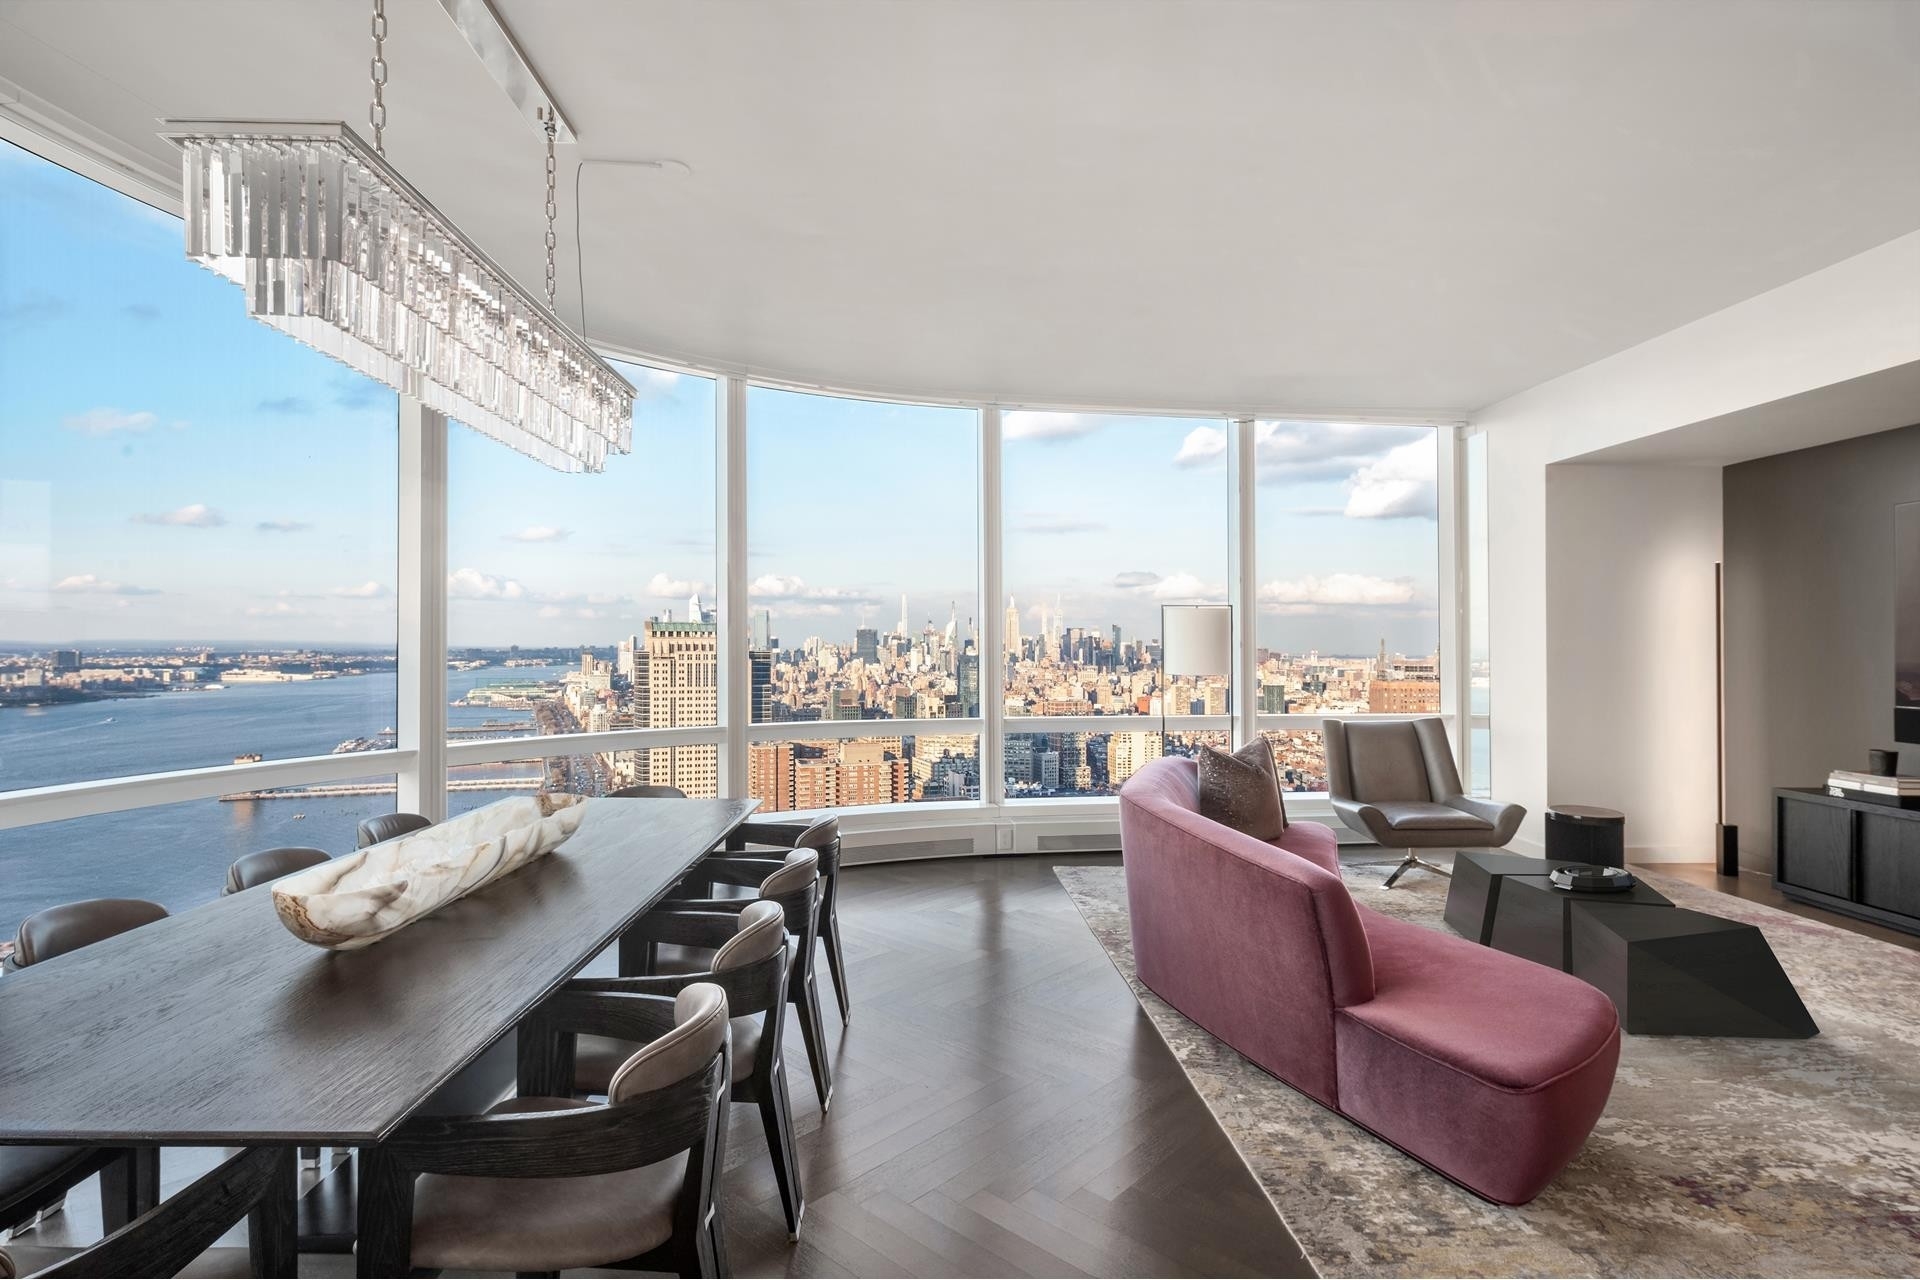 Condominium for Sale at One Eleven Murray Street, 111 MURRAY ST, 48WE TriBeCa, New York, NY 10007